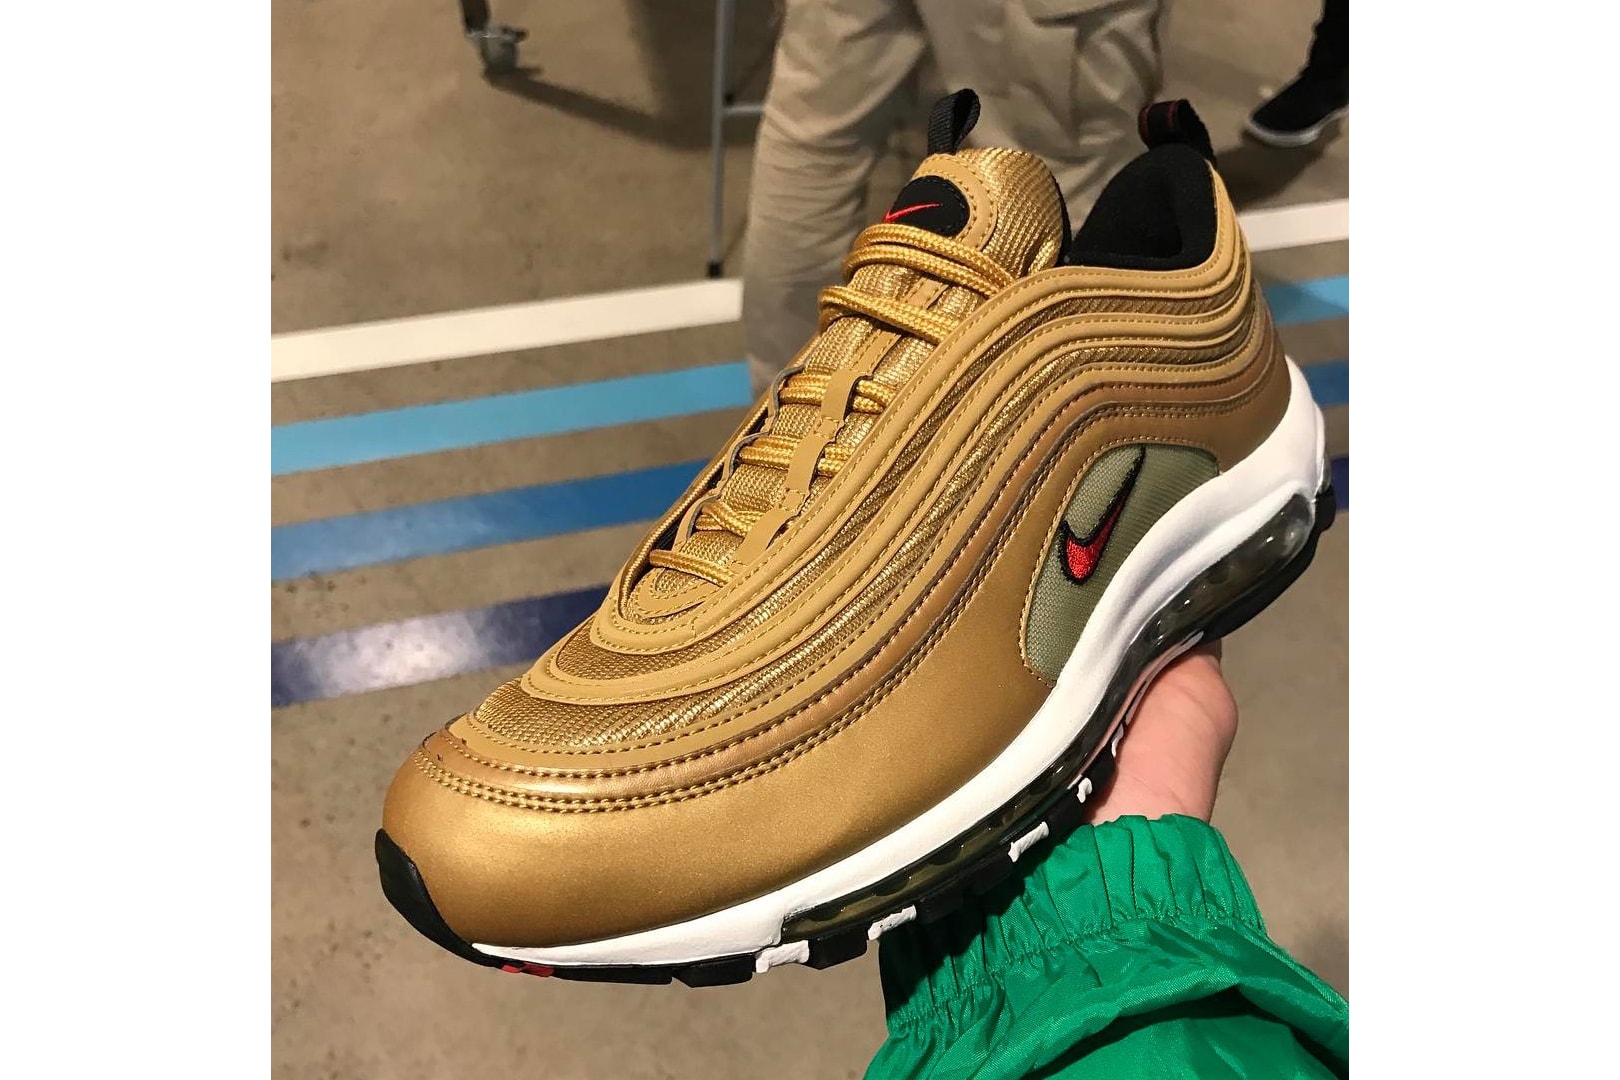 Nike Air Max 97 “Gold” Release 2017